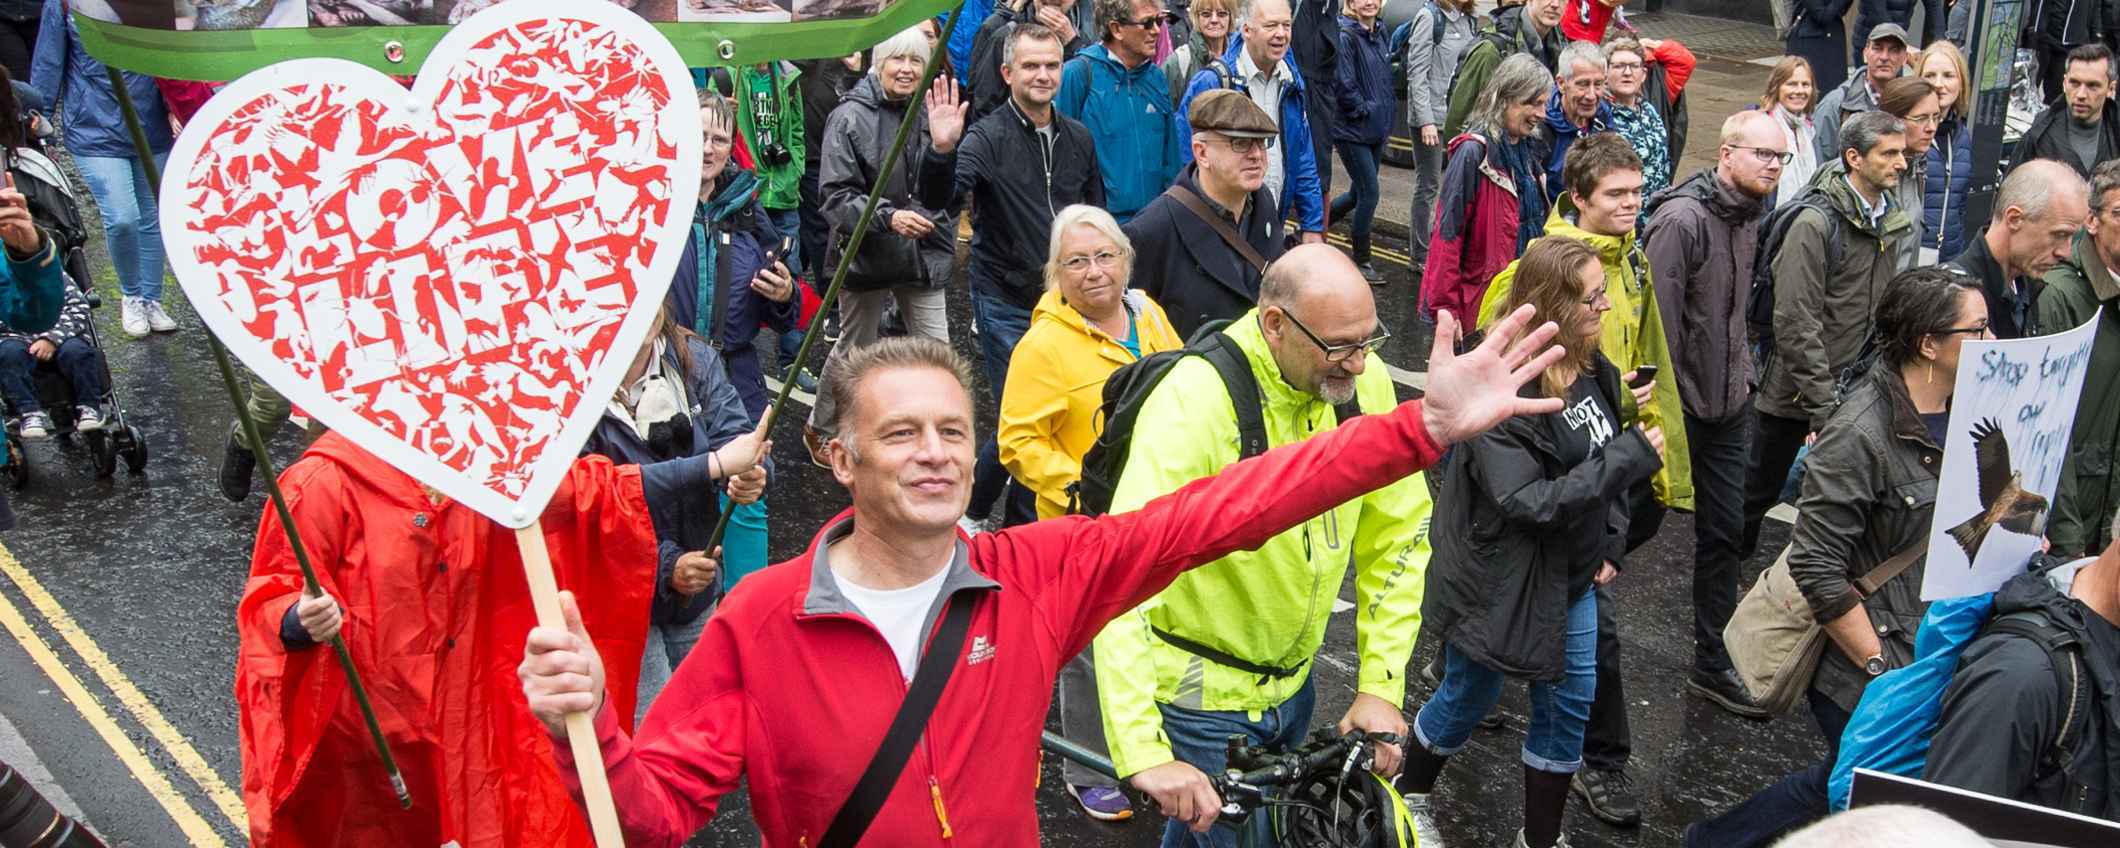 Chris Packham at the People's Walk for Wildlife in London 2018